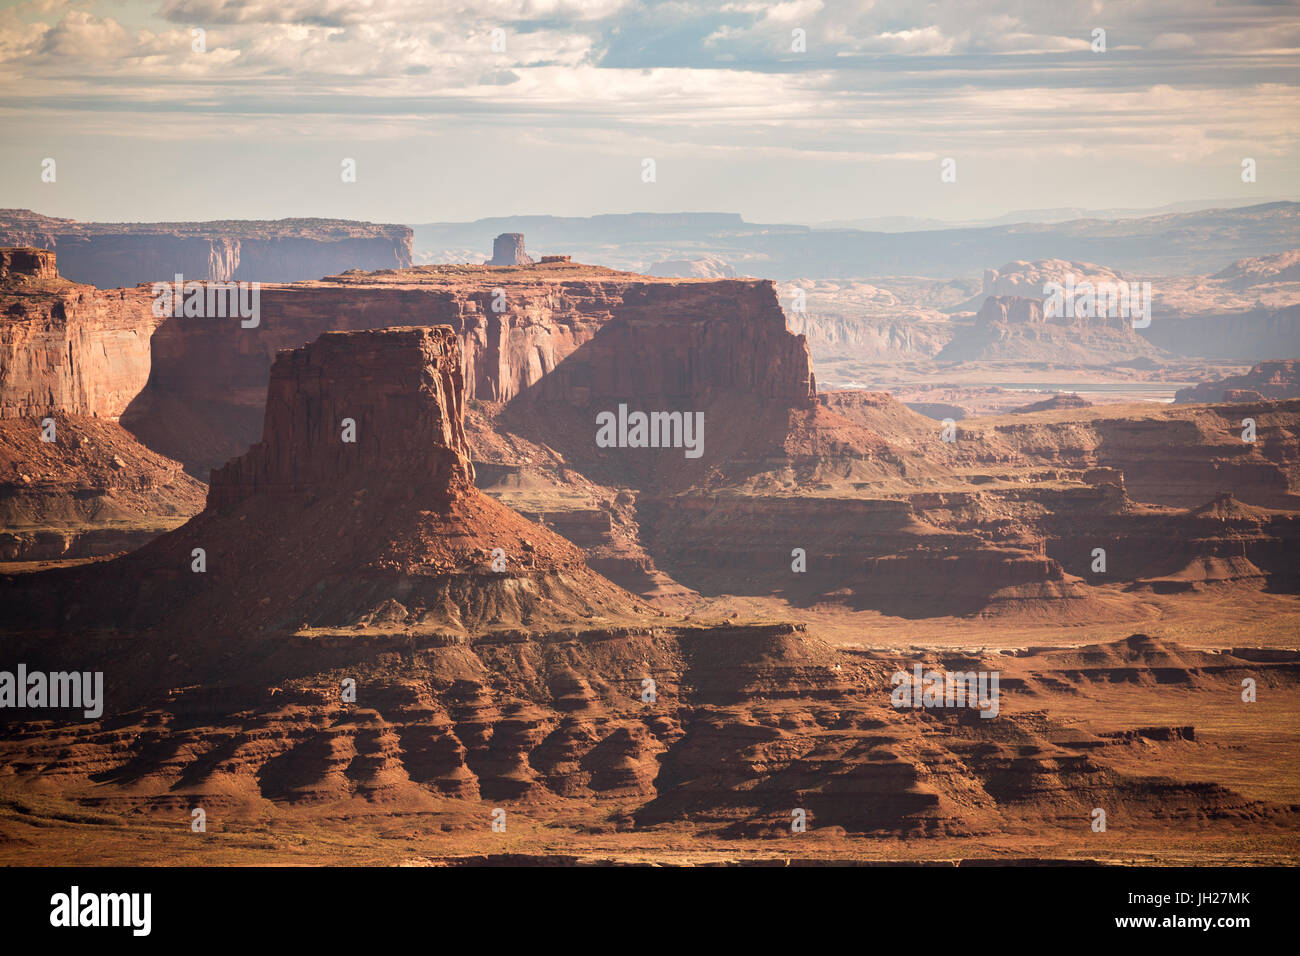 Rock formations in Canyonlands National Park, Moab, Utah, United States of America, North America Stock Photo